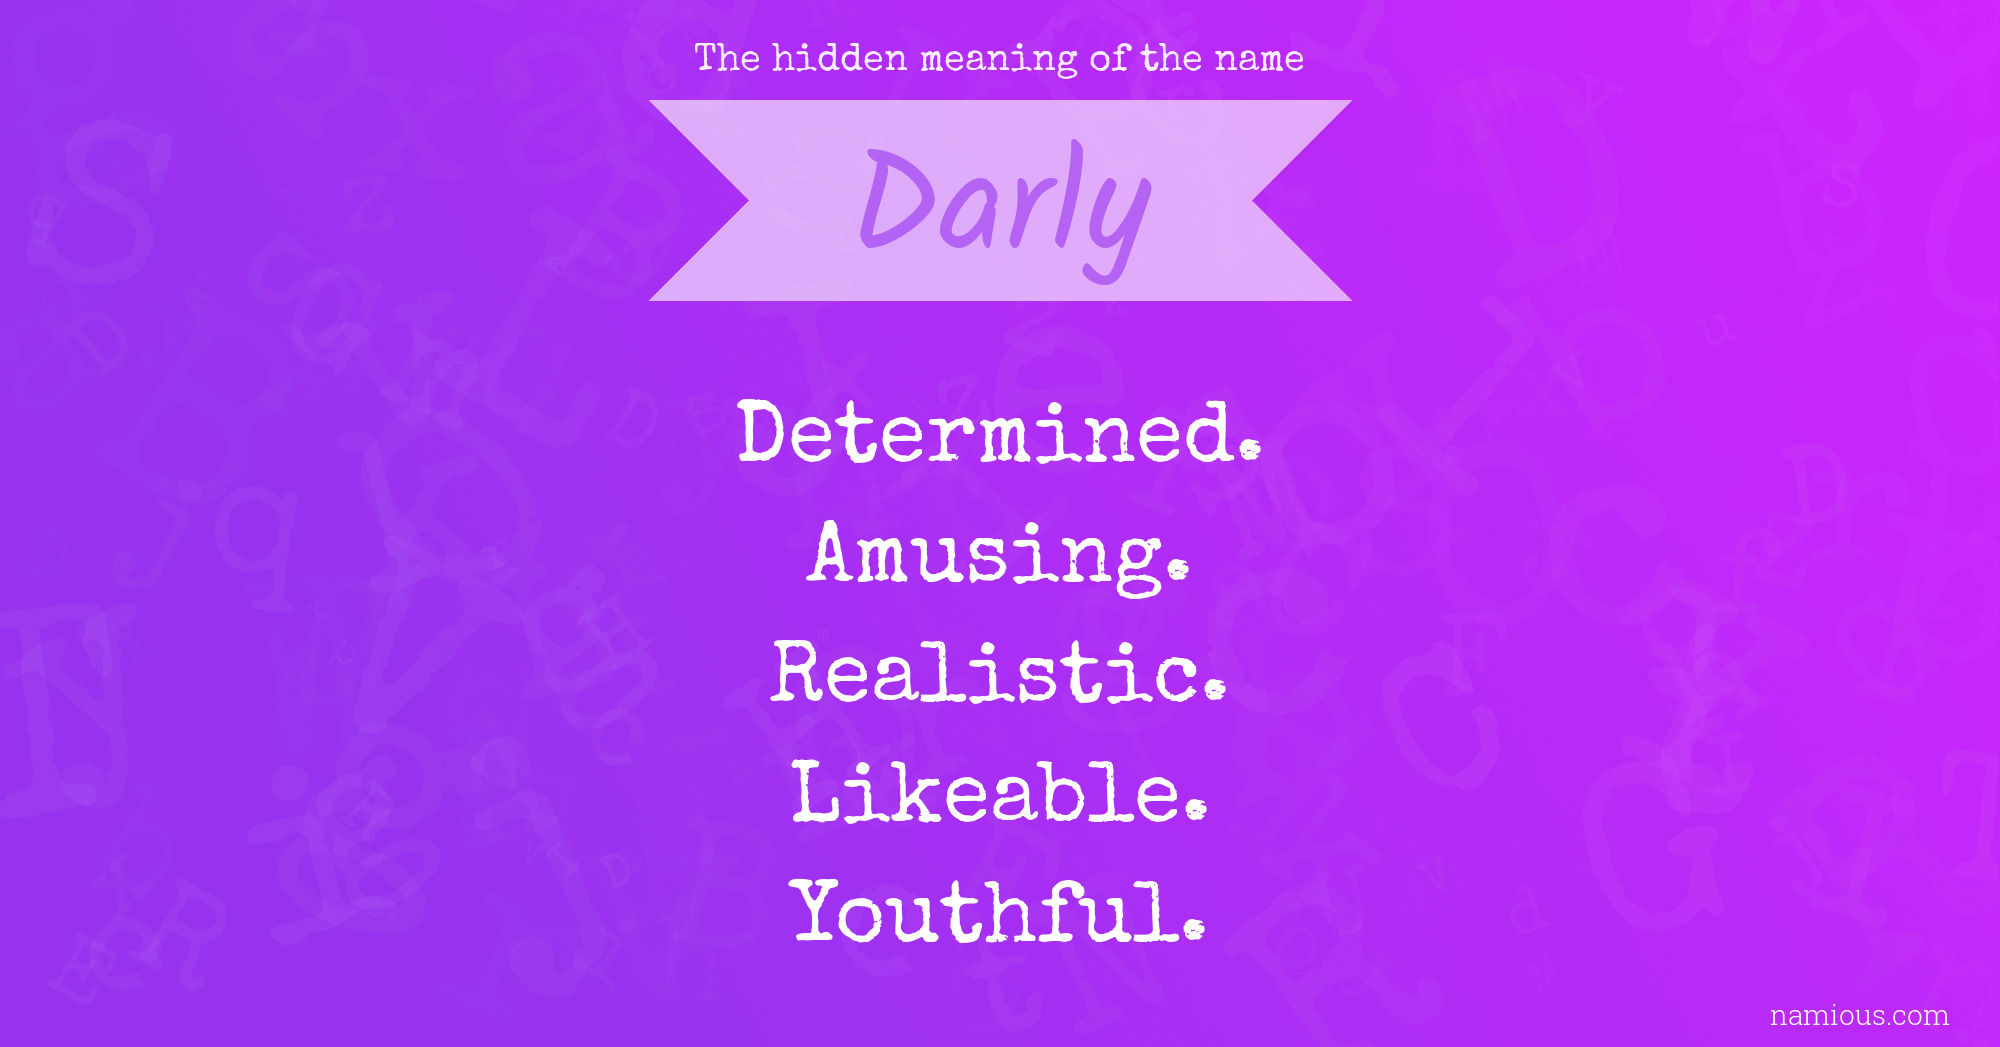 The hidden meaning of the name Darly